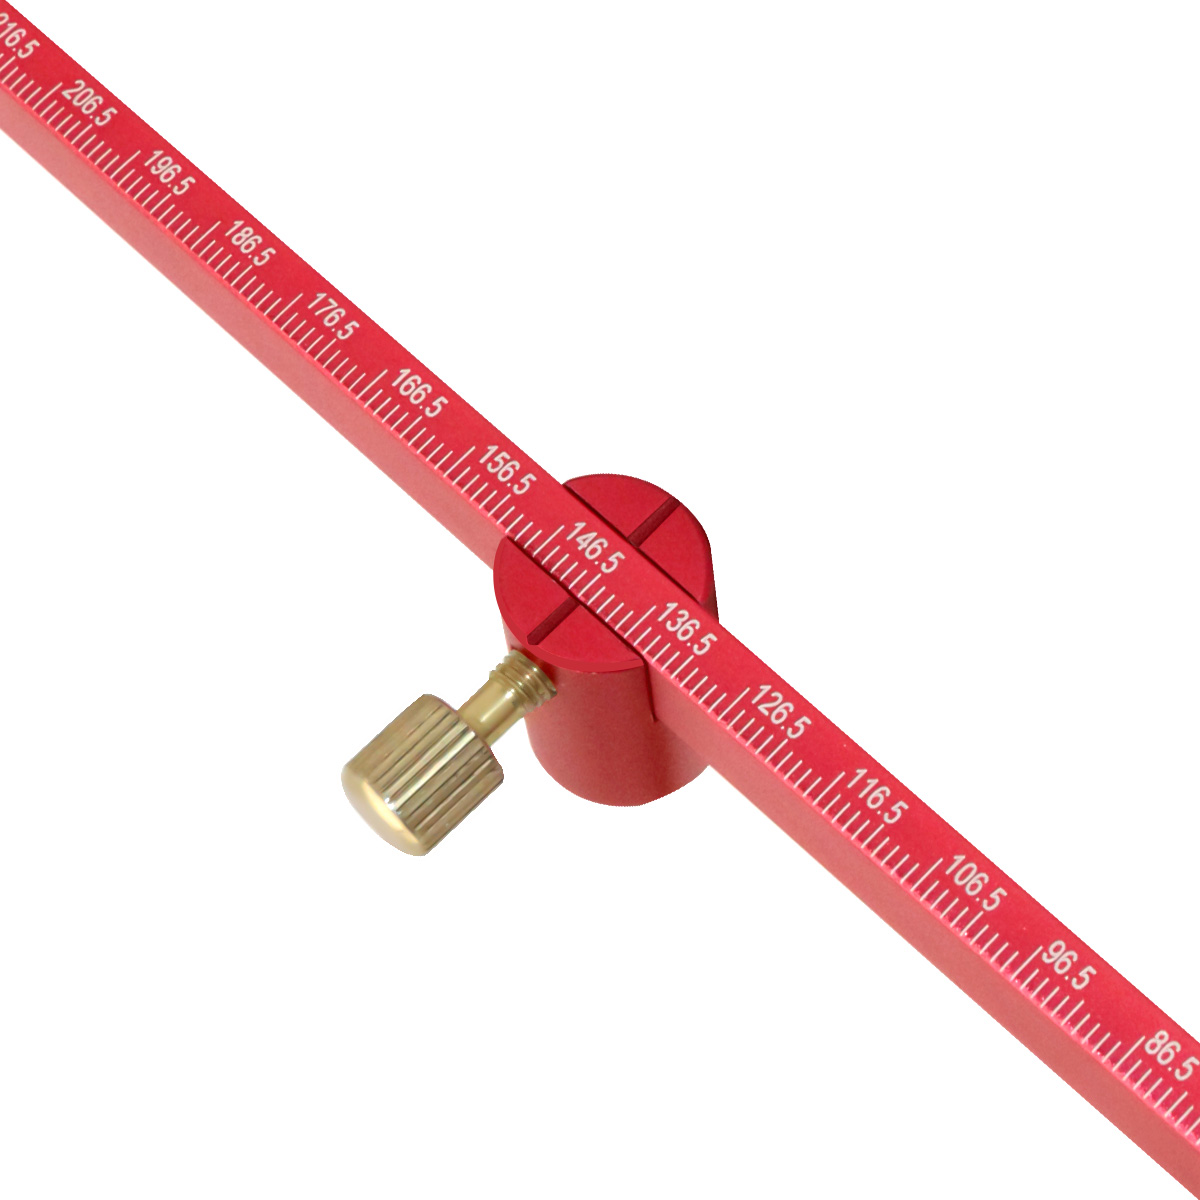 300mm Adjustable Drawing Circle Ruler Aluminum Alloy Construction Center Finder Fixed-Point Circle Line Marking - Perfect for Woodworking and Crafts Create Precise Circles with Ease